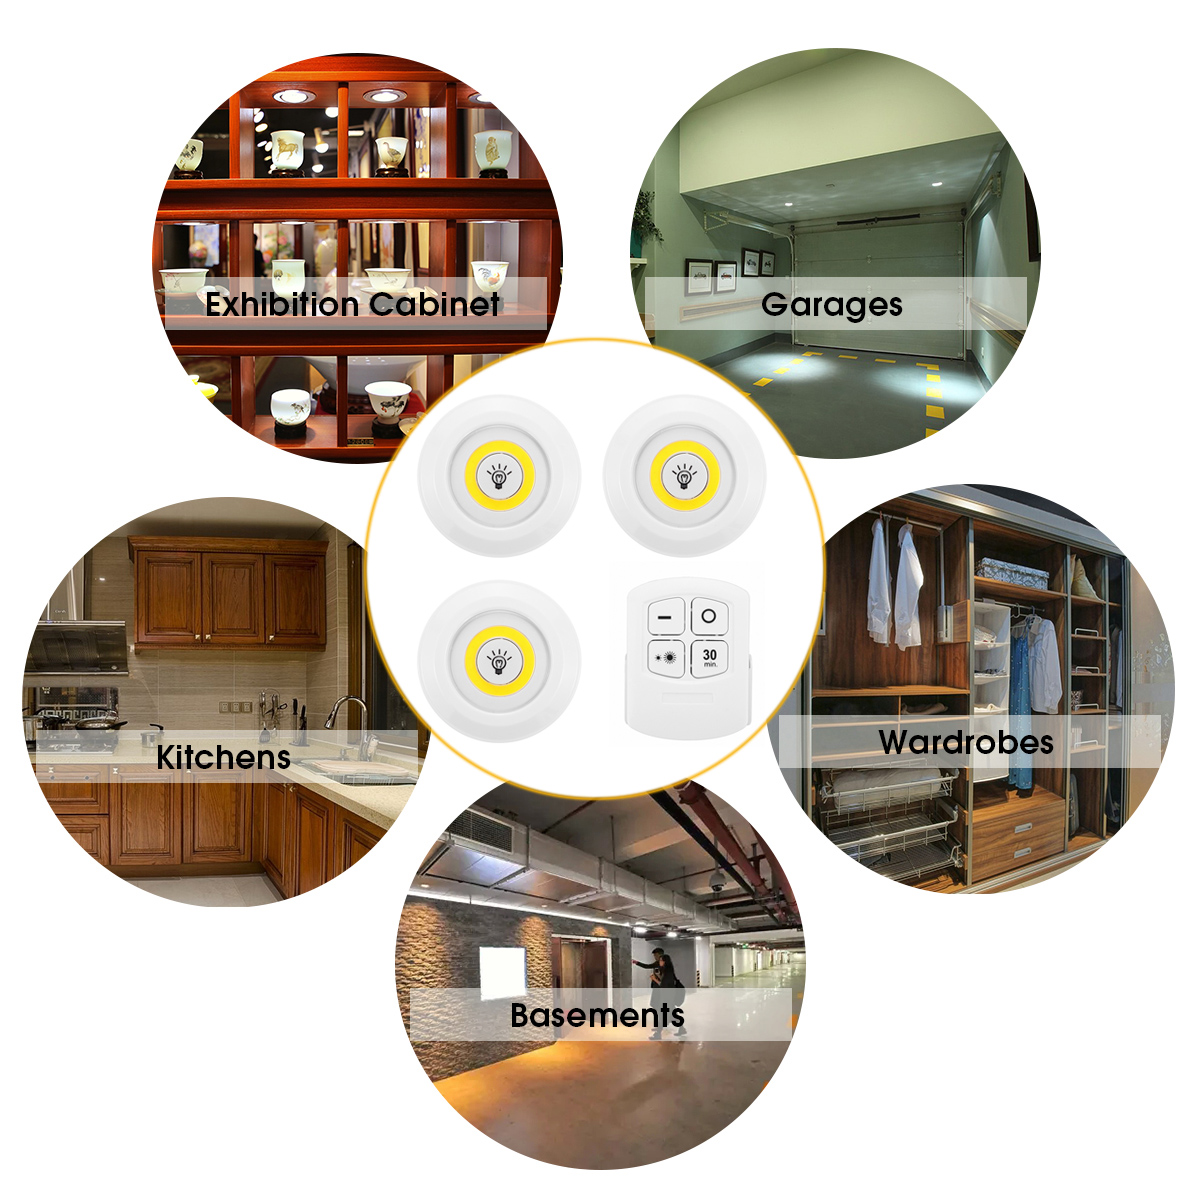 3PCS-150LM-3W-LED-Lamp-Wireless-Remote-Control-Touch-Night-Light-RC-Bedroom-Sensing-Night-Light-for--1687915